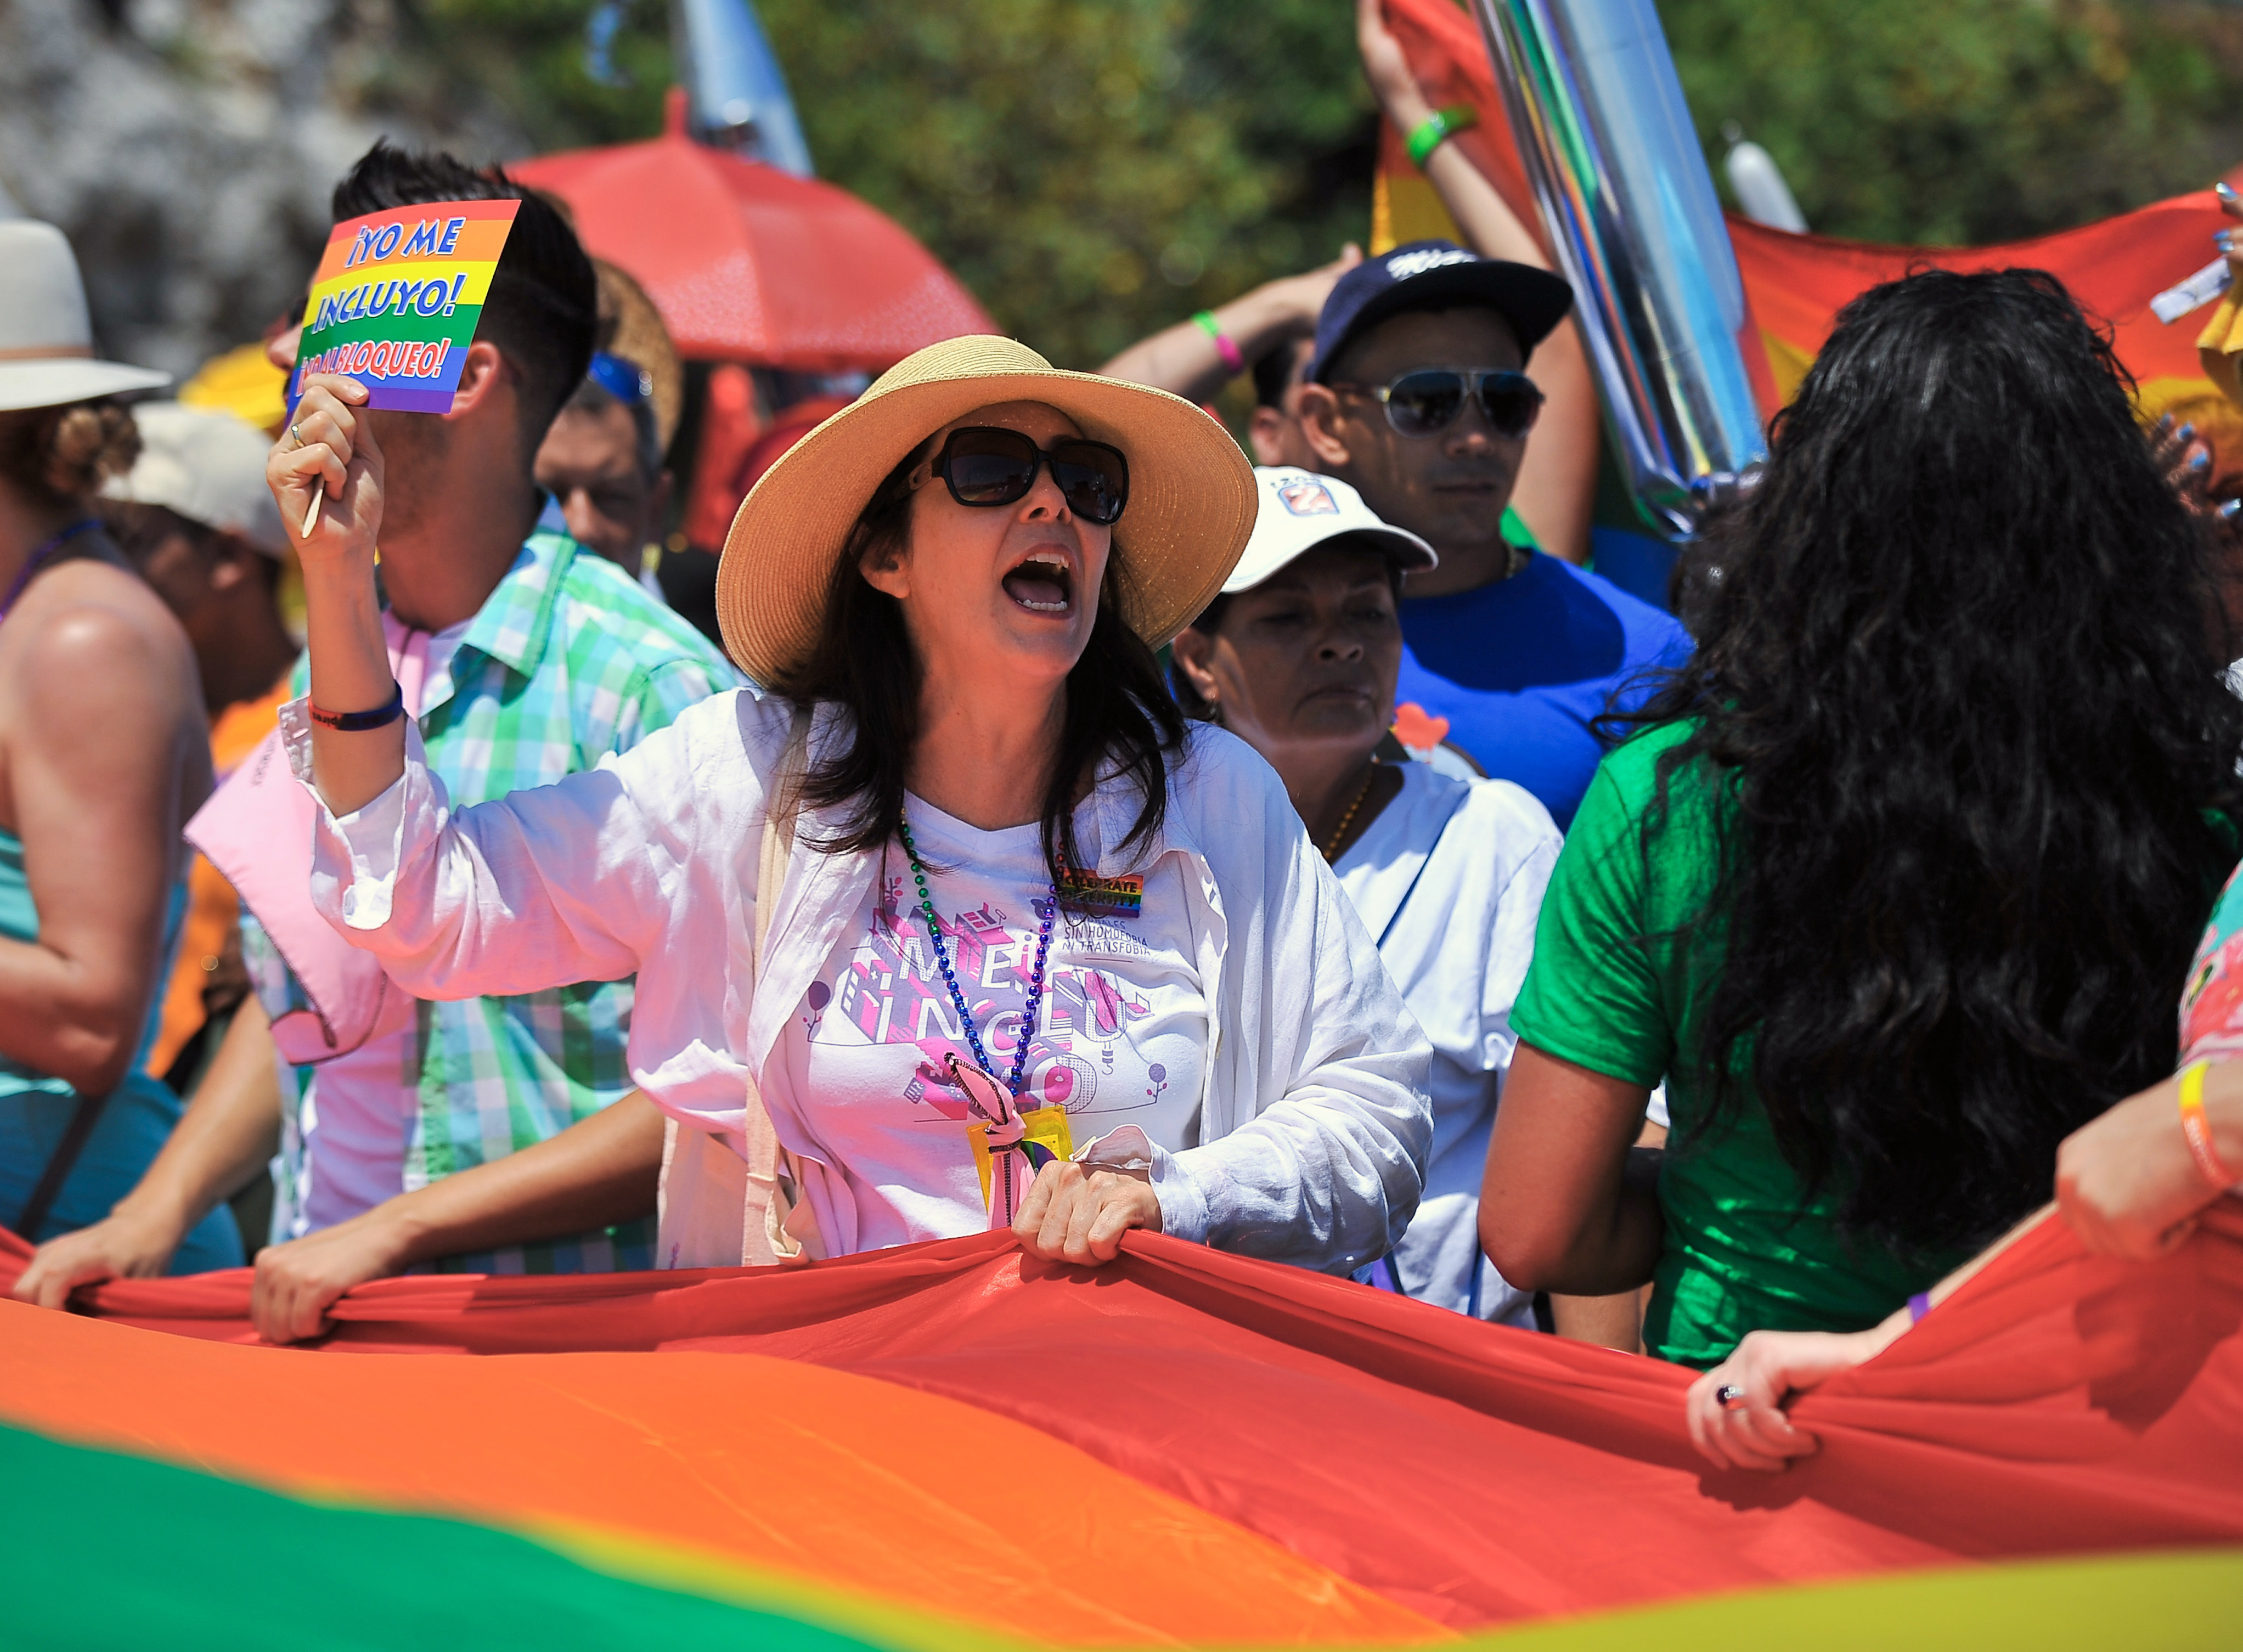 Cuban director of the Cuban National Center for Sex Education (CENESEX) Mariela Castro, daughter of President Raul Castro, participates in a march against homophobia on May 14, 2016 in Havana. / AFP PHOTO / YAMIL LAGE